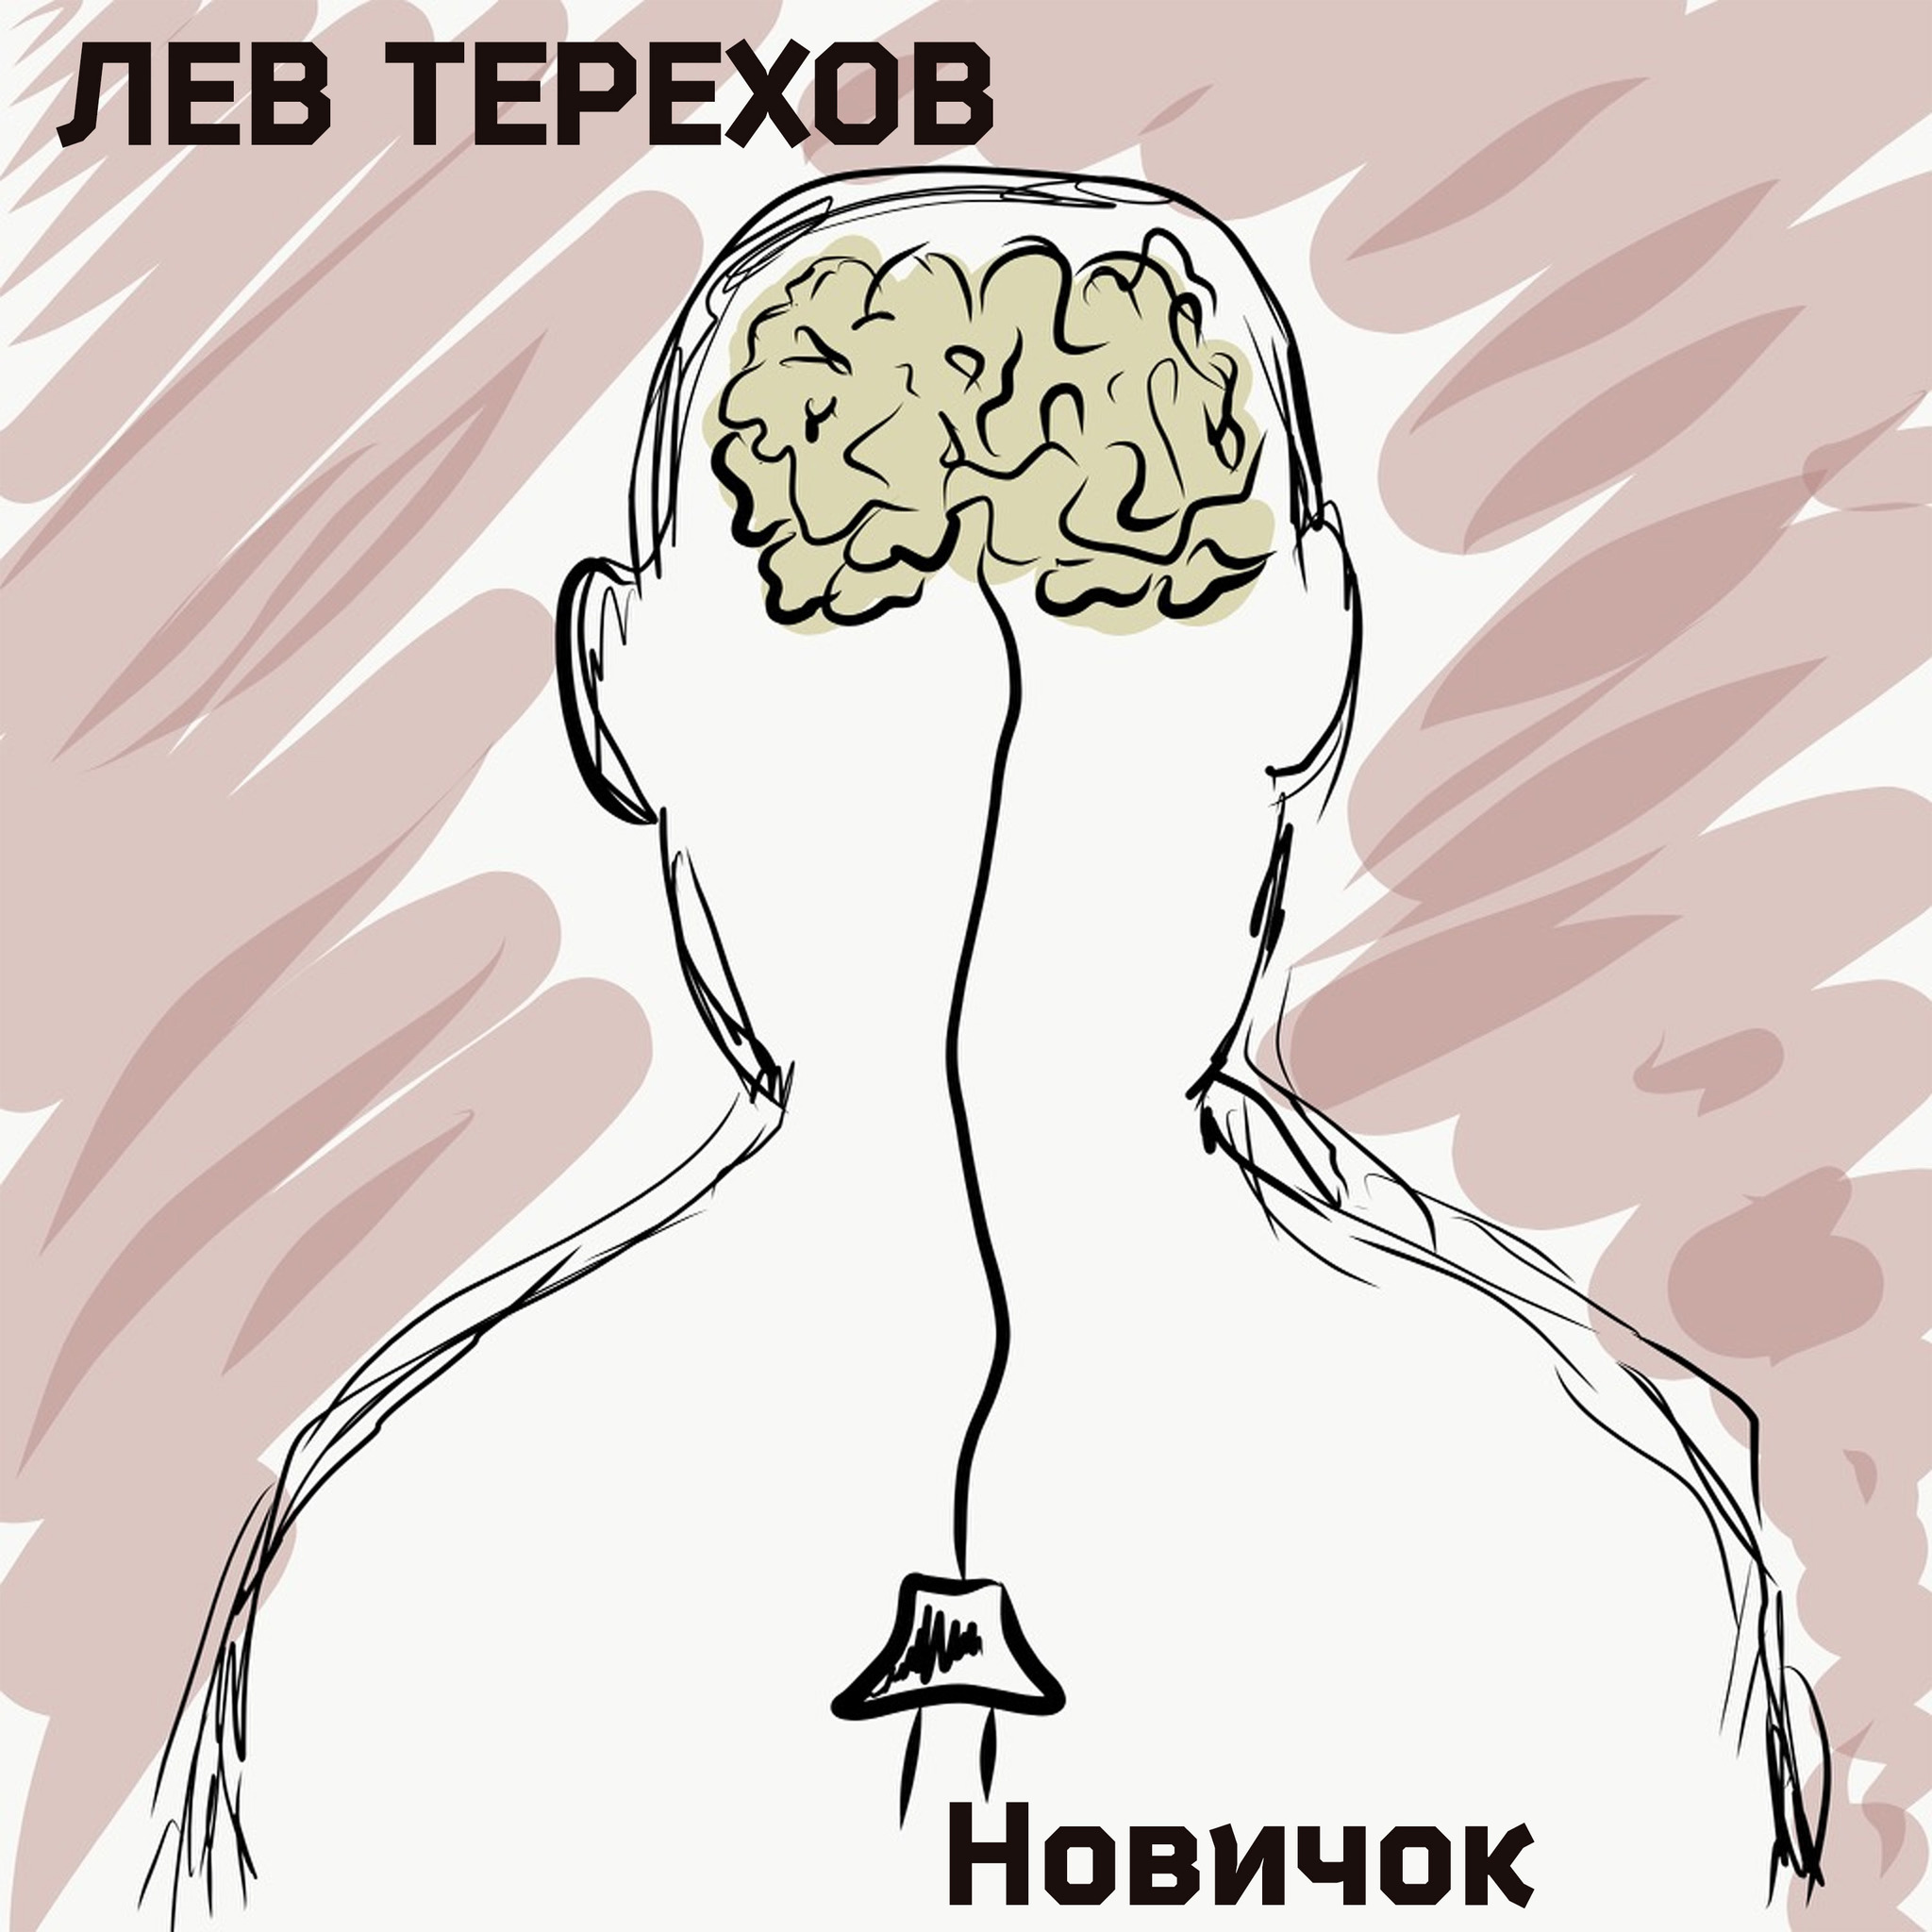 Lev Terekhov released his debut singles, welcome! - Fire, What's this?, What to read?, Release, New, Новичок, Music, Rap